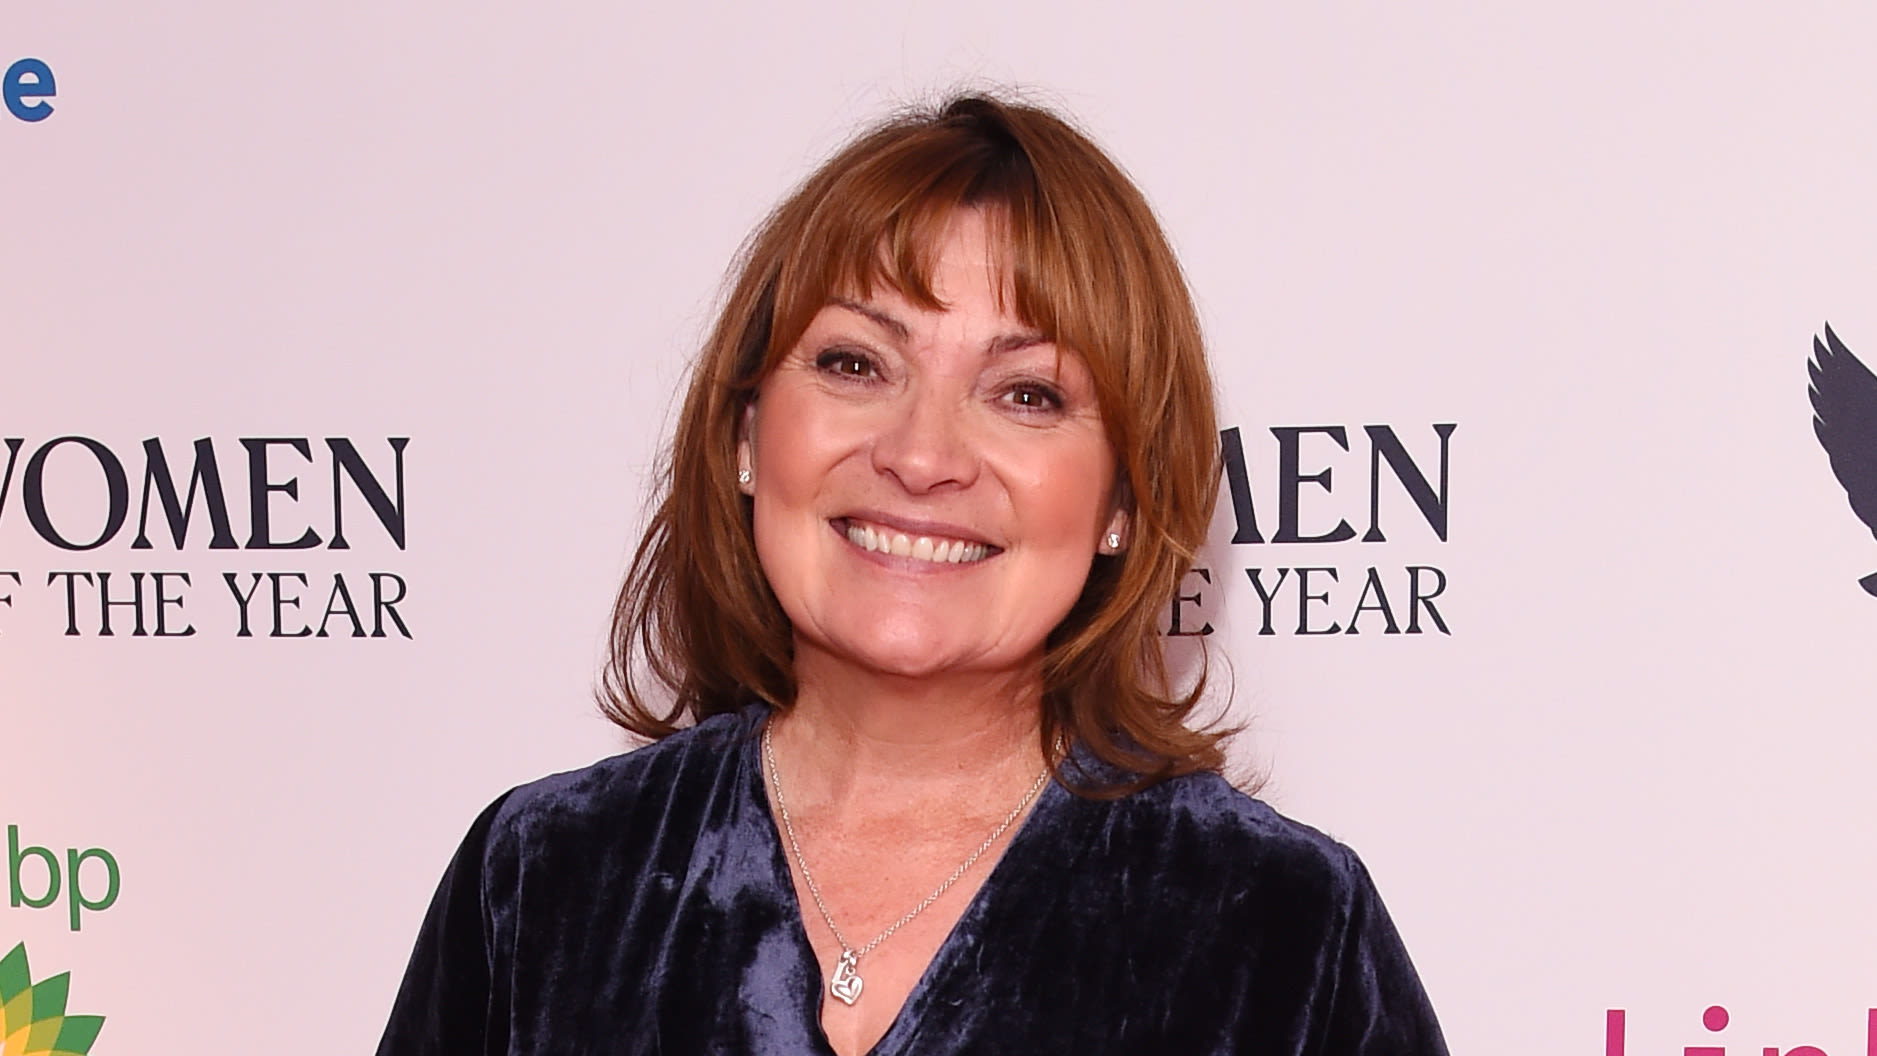 Lorraine Kelly says she doesn't mind interviewing 'horrid' people